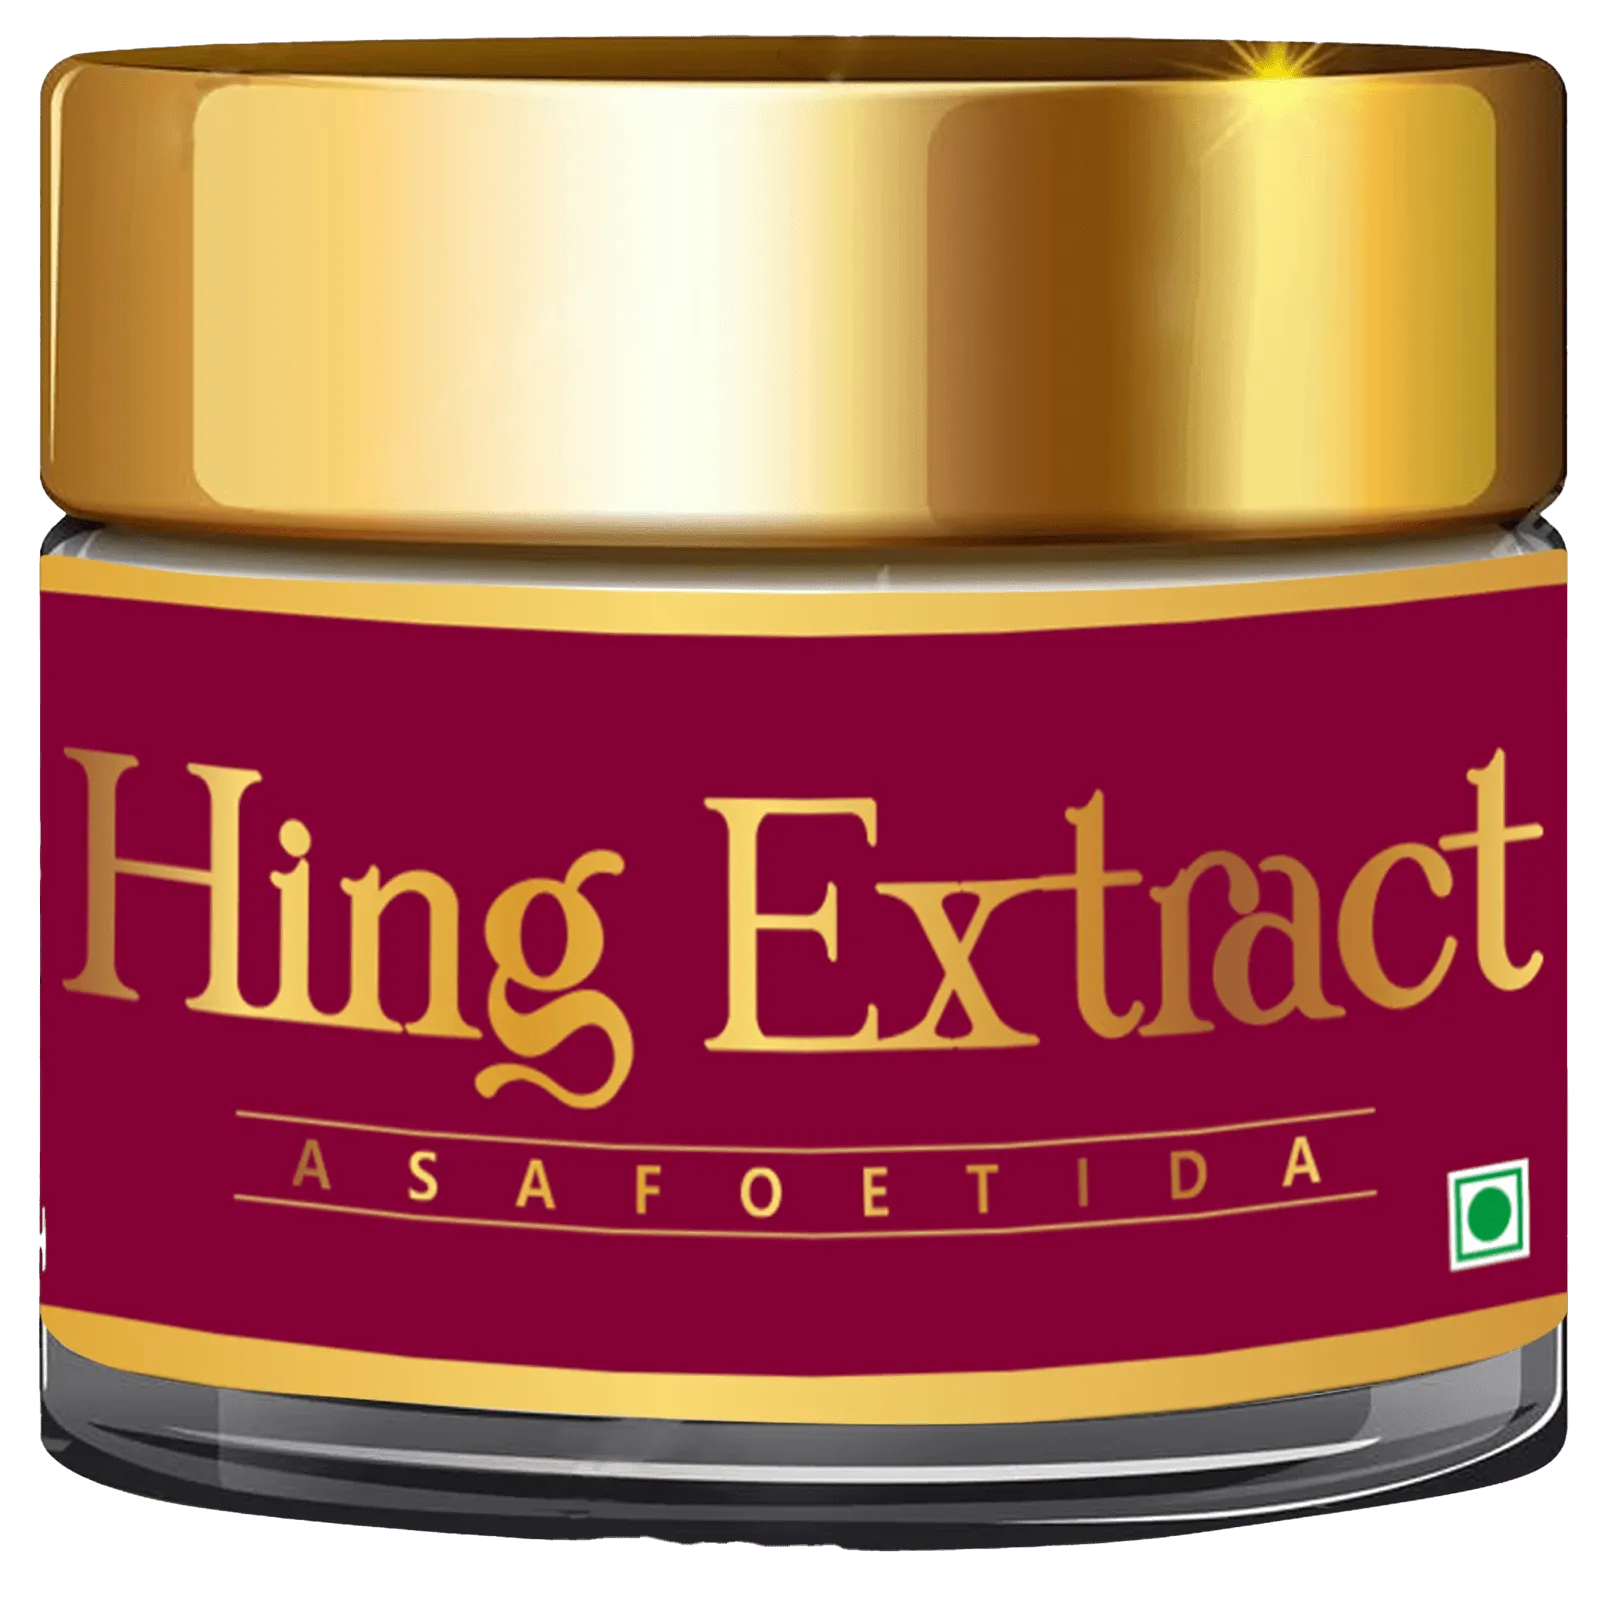 Extract hing